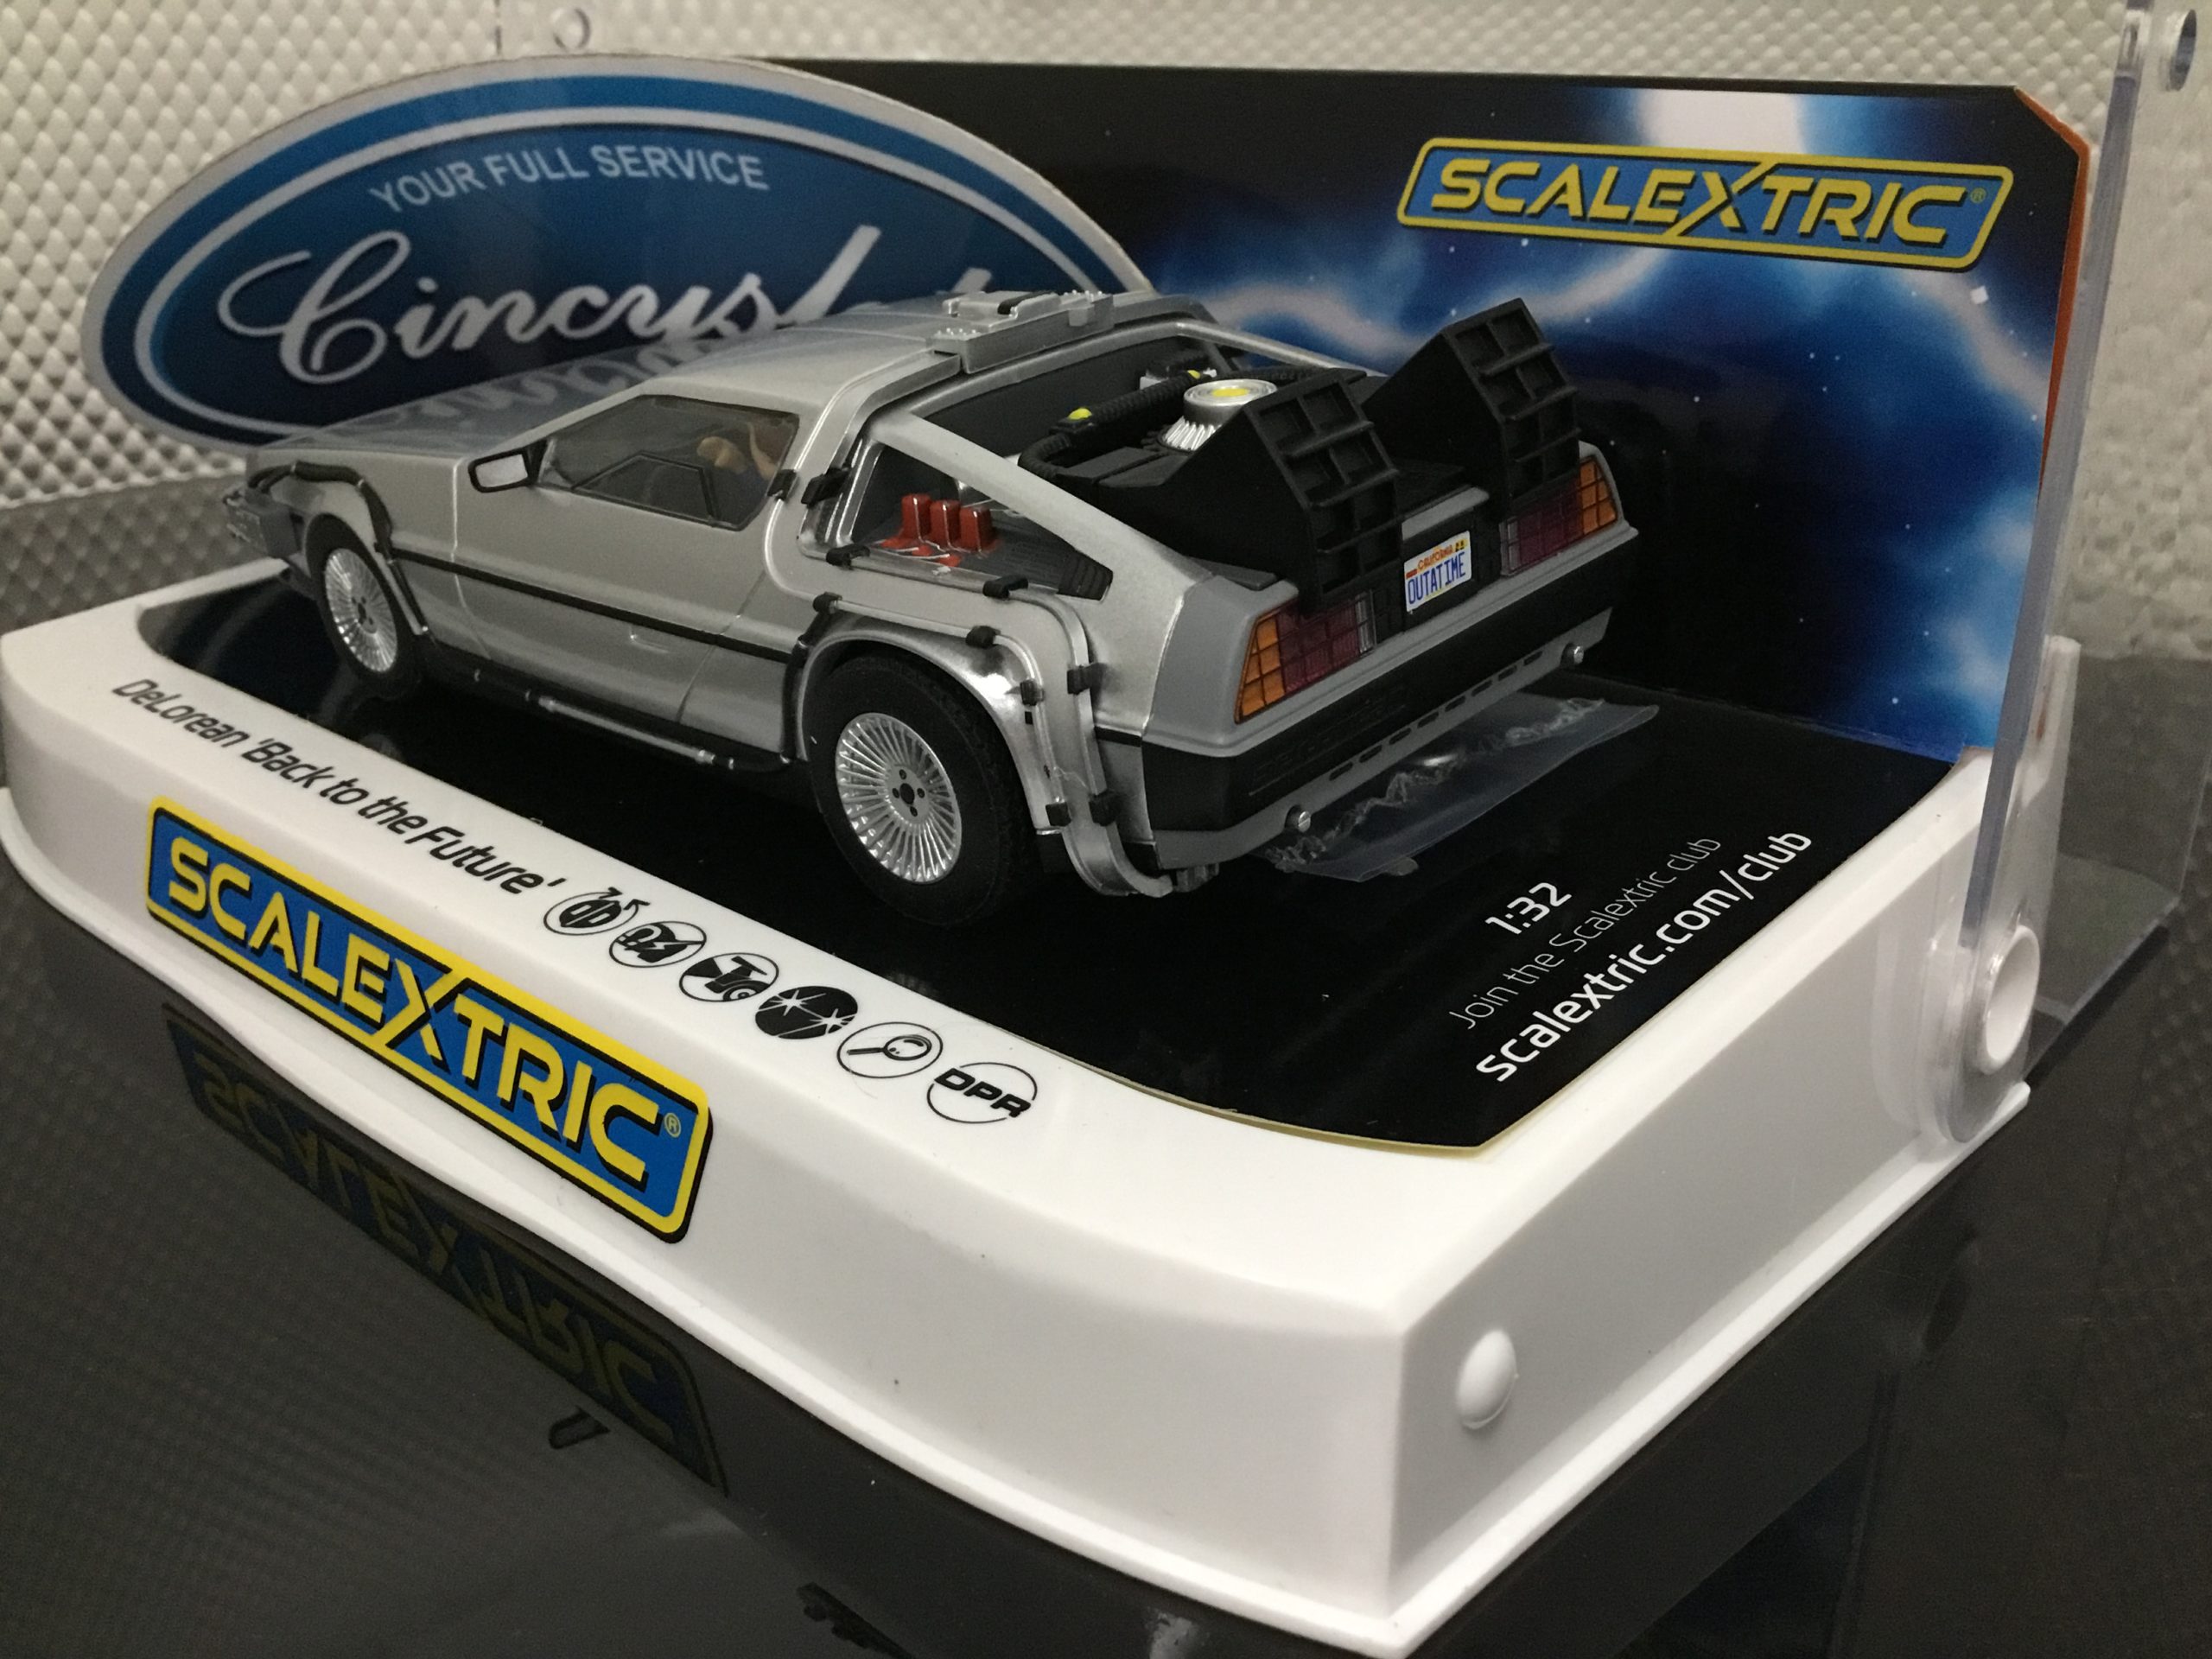 Back to The Future Car for sale online Scalextric C4117 Delorean 